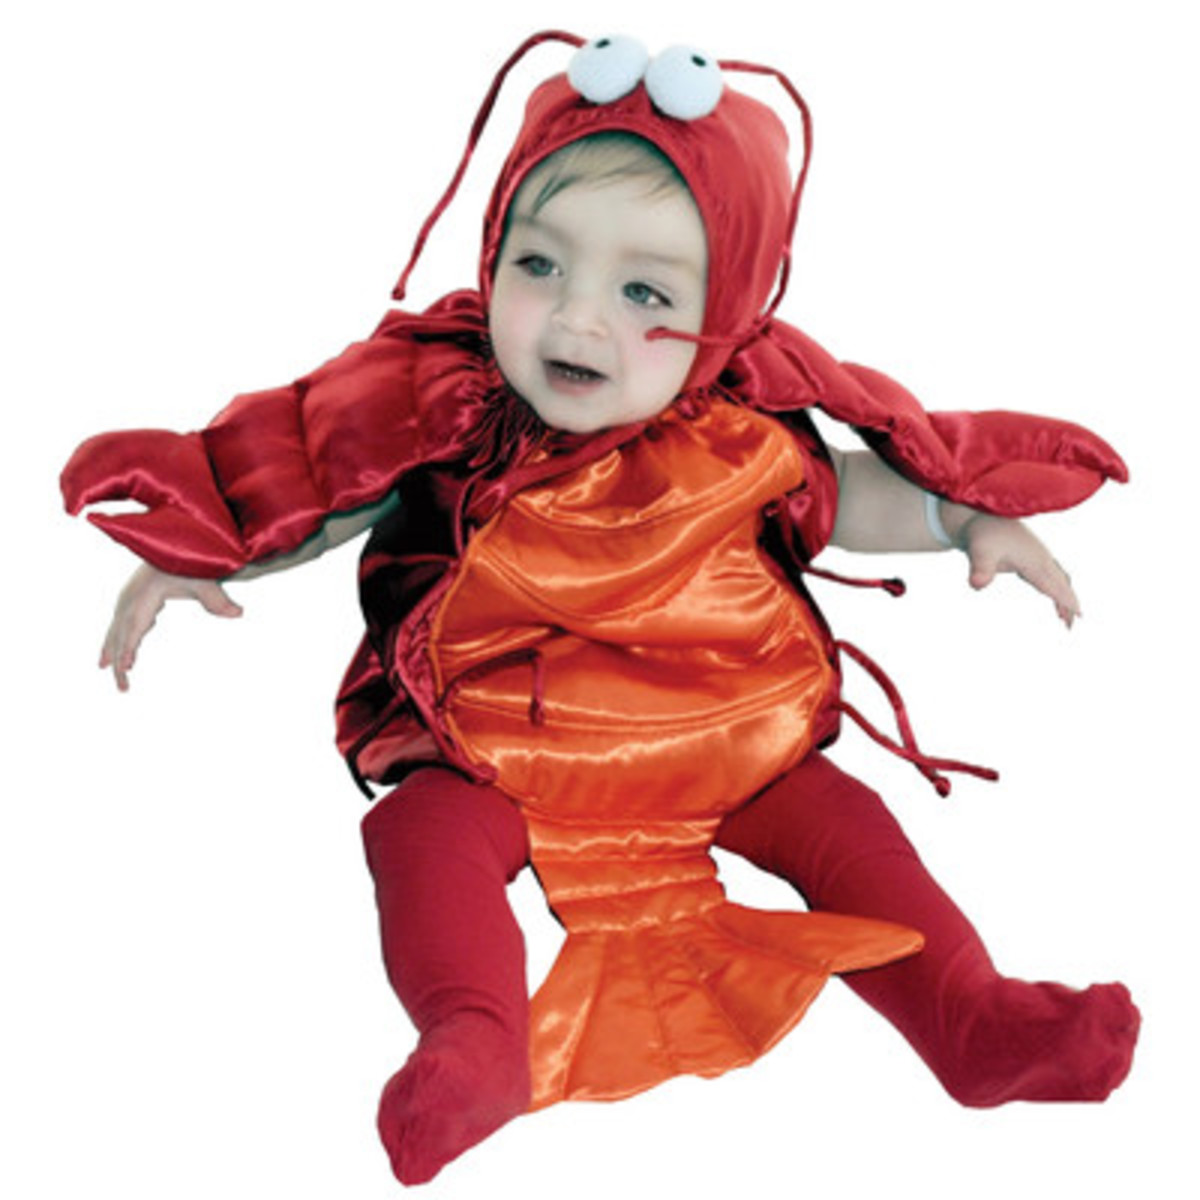 Baby Lobster Costume